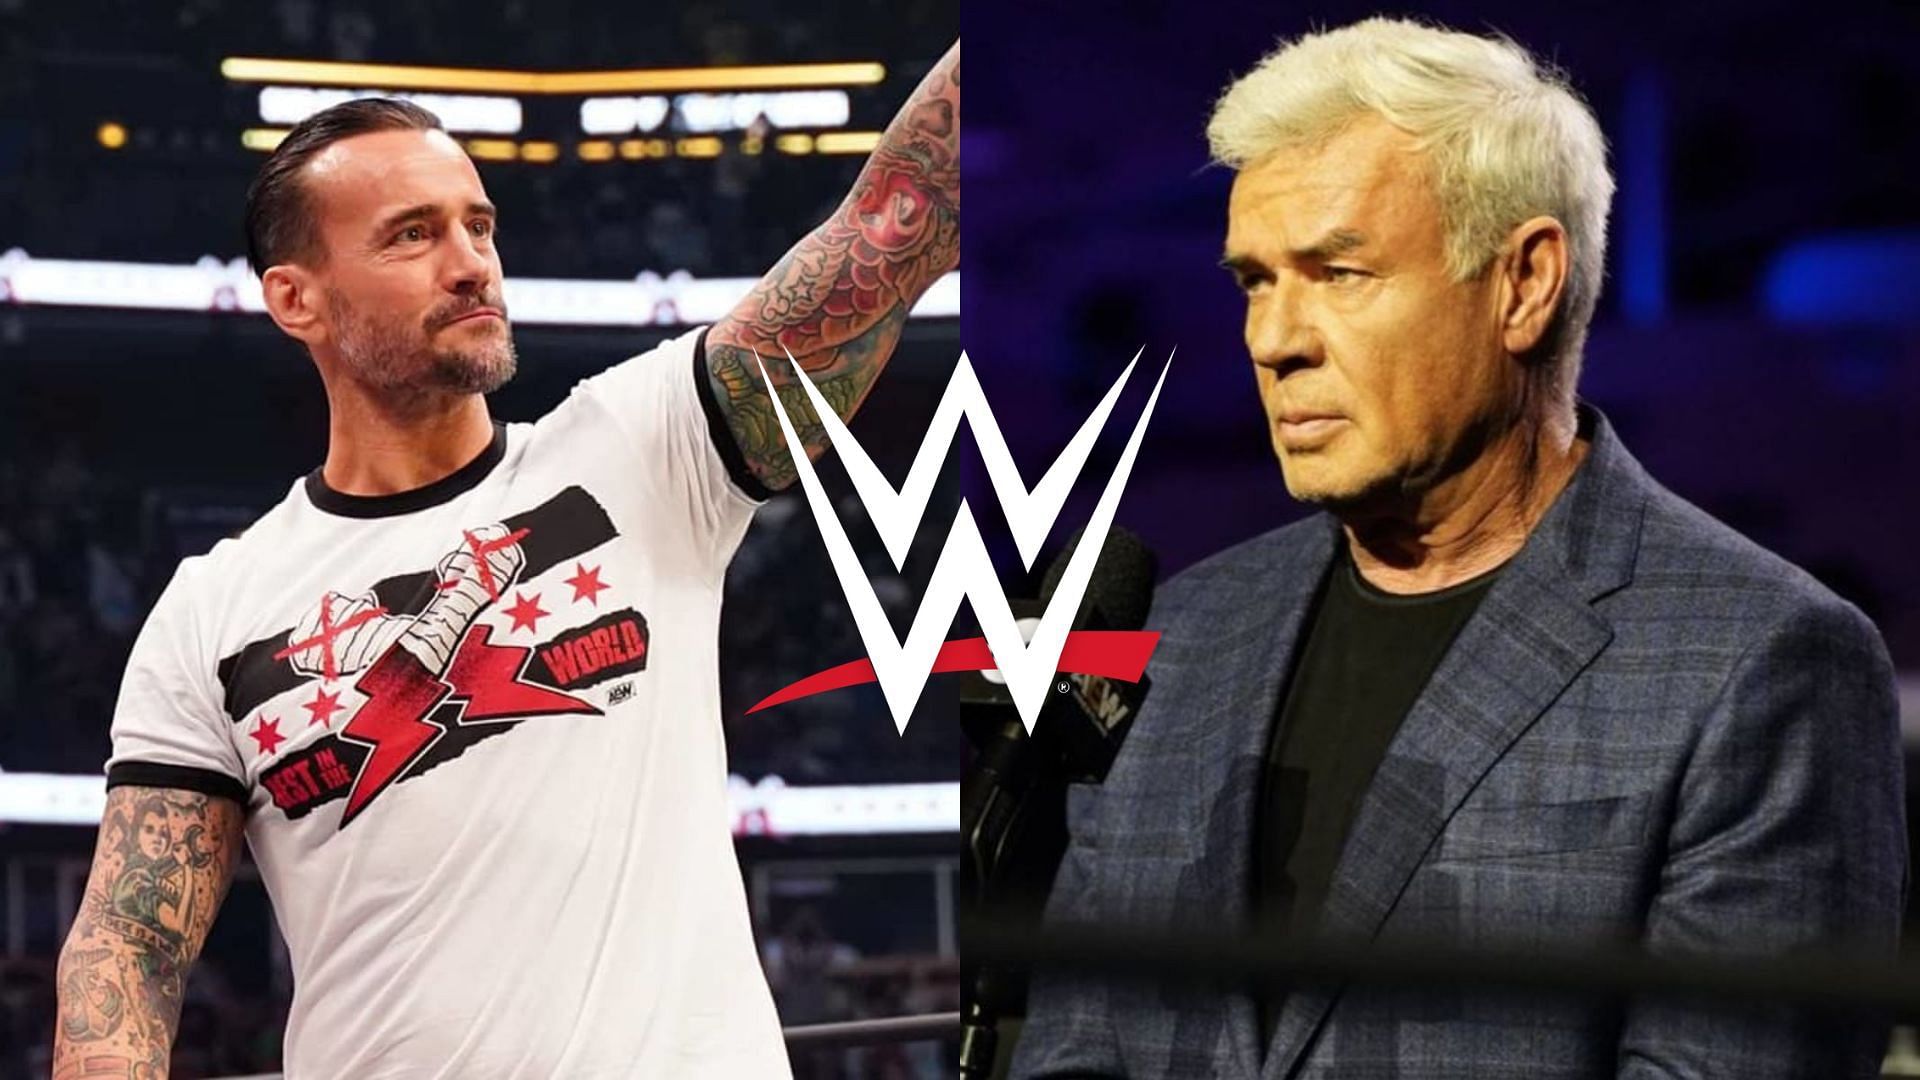 CM Punk and Eric Bischoff both previously worked for WWE